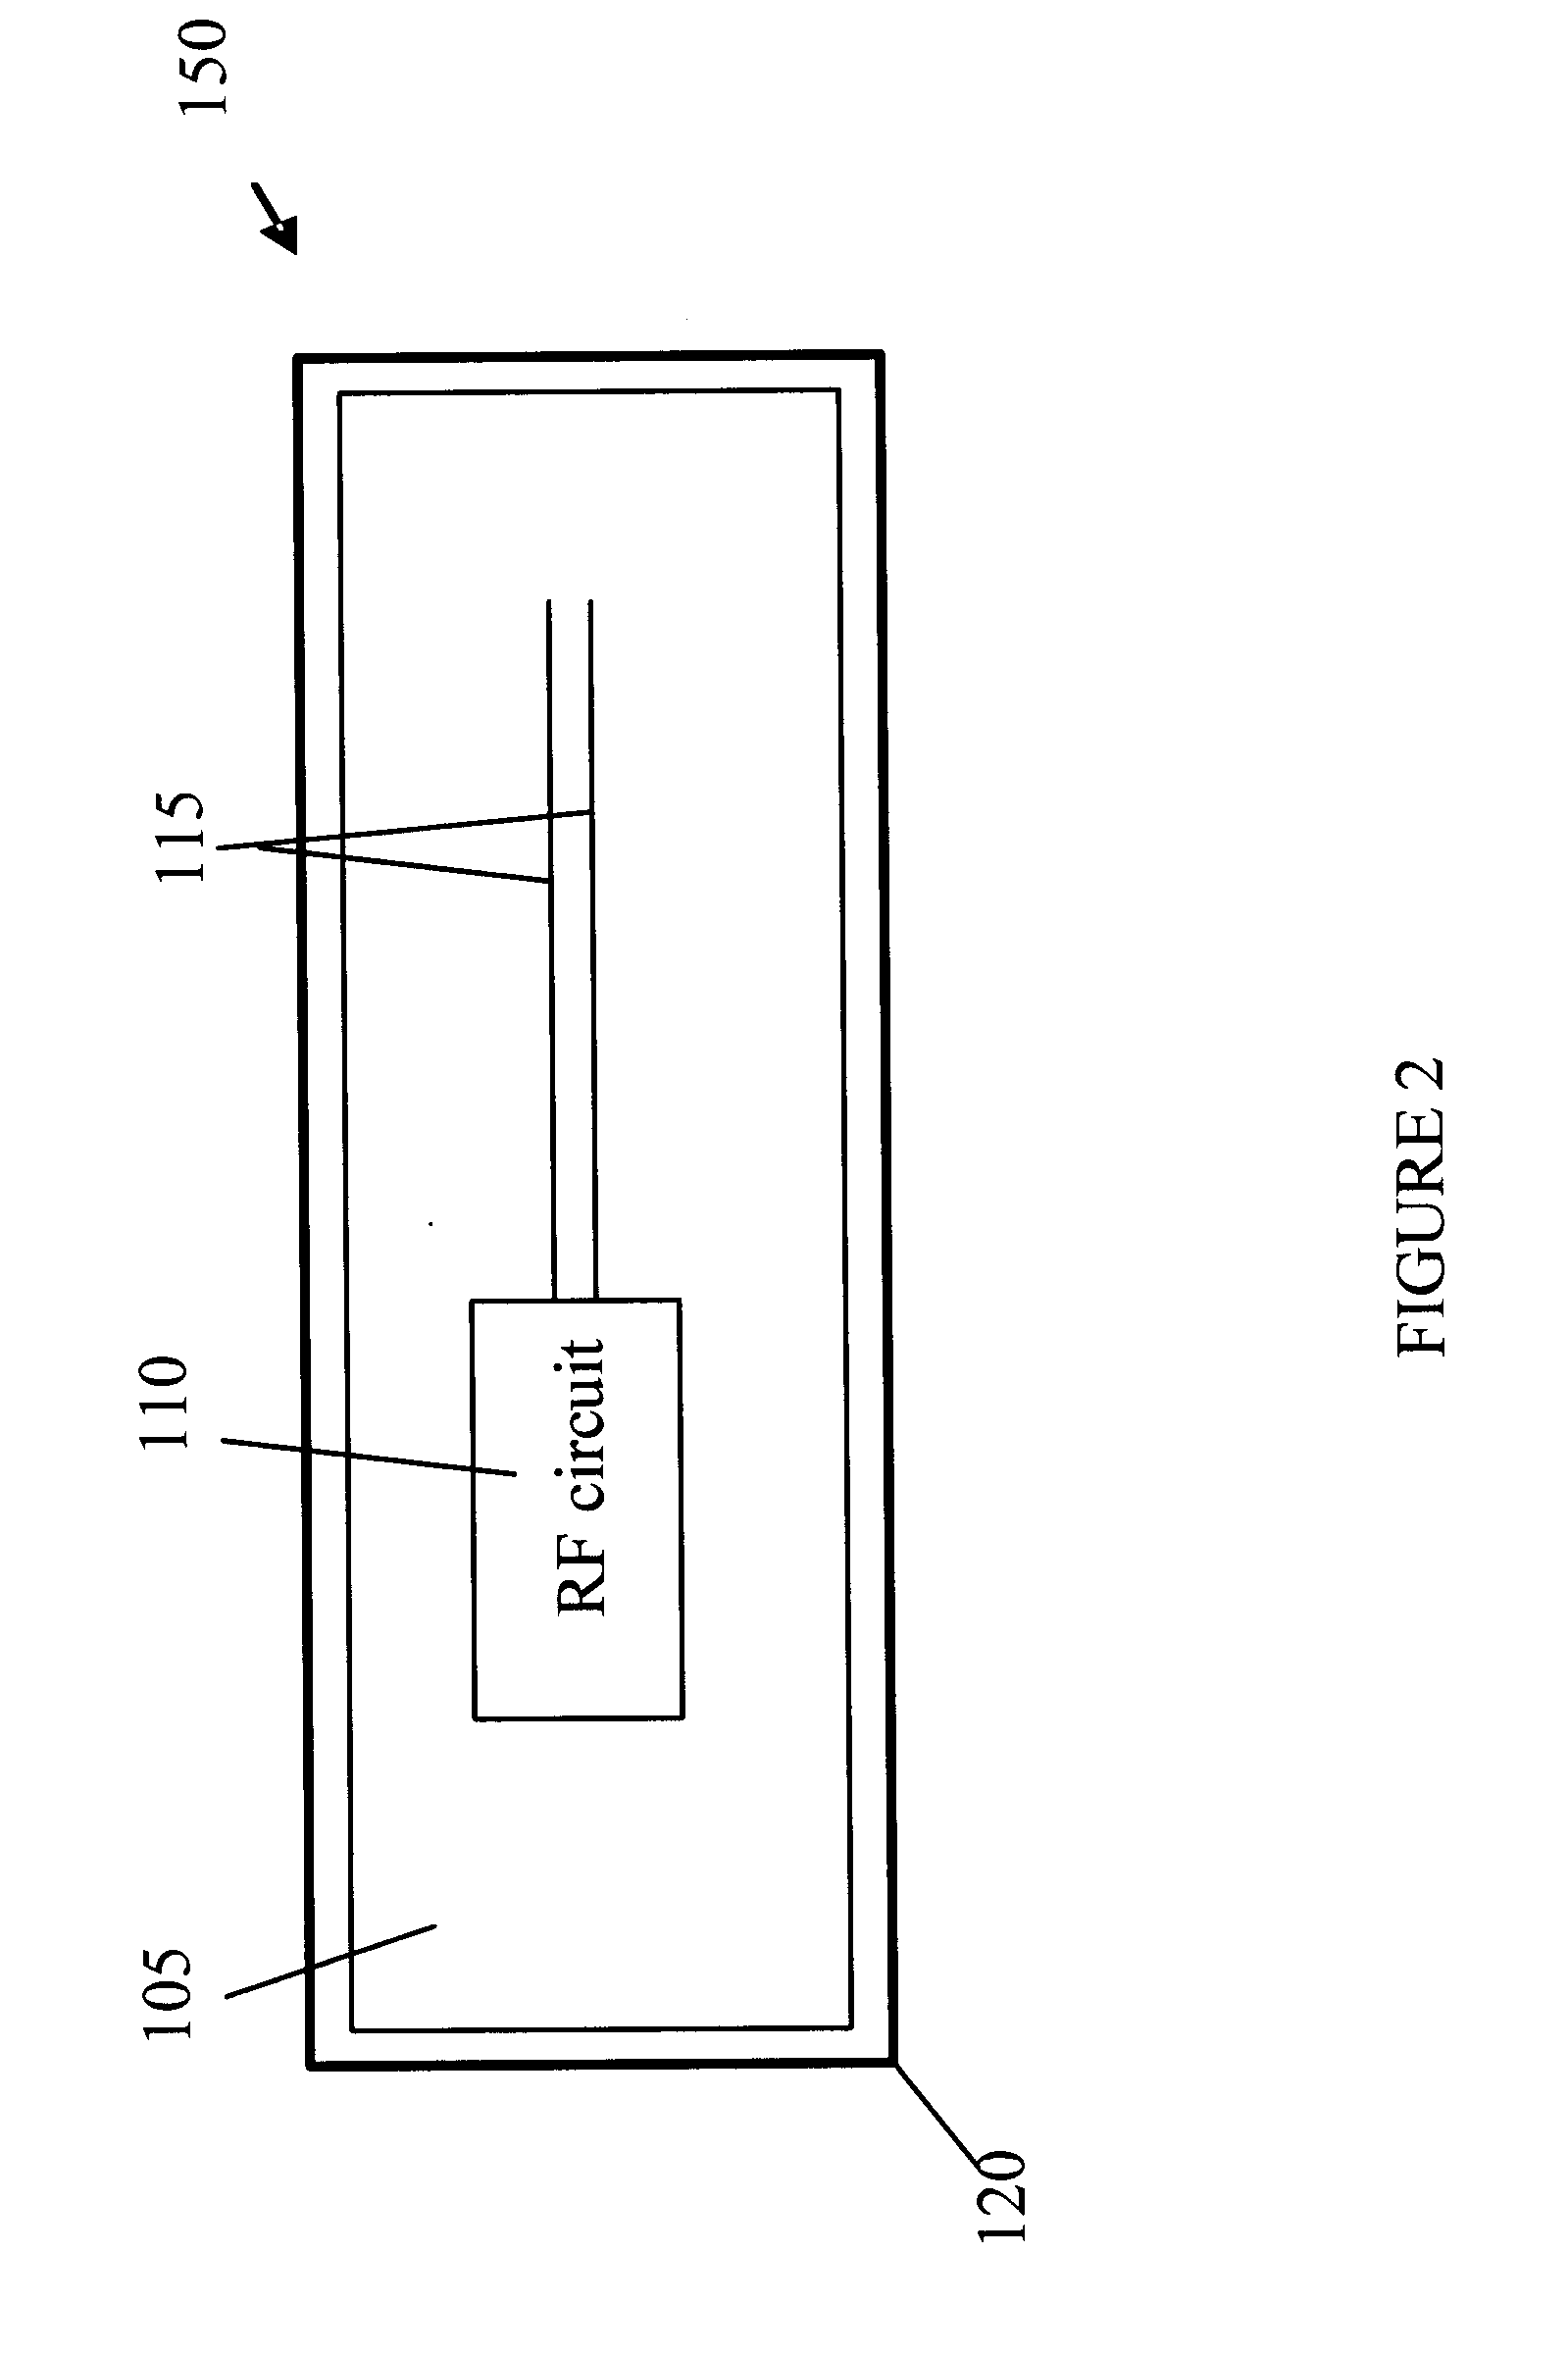 Method and apparatus for chemical detection and release